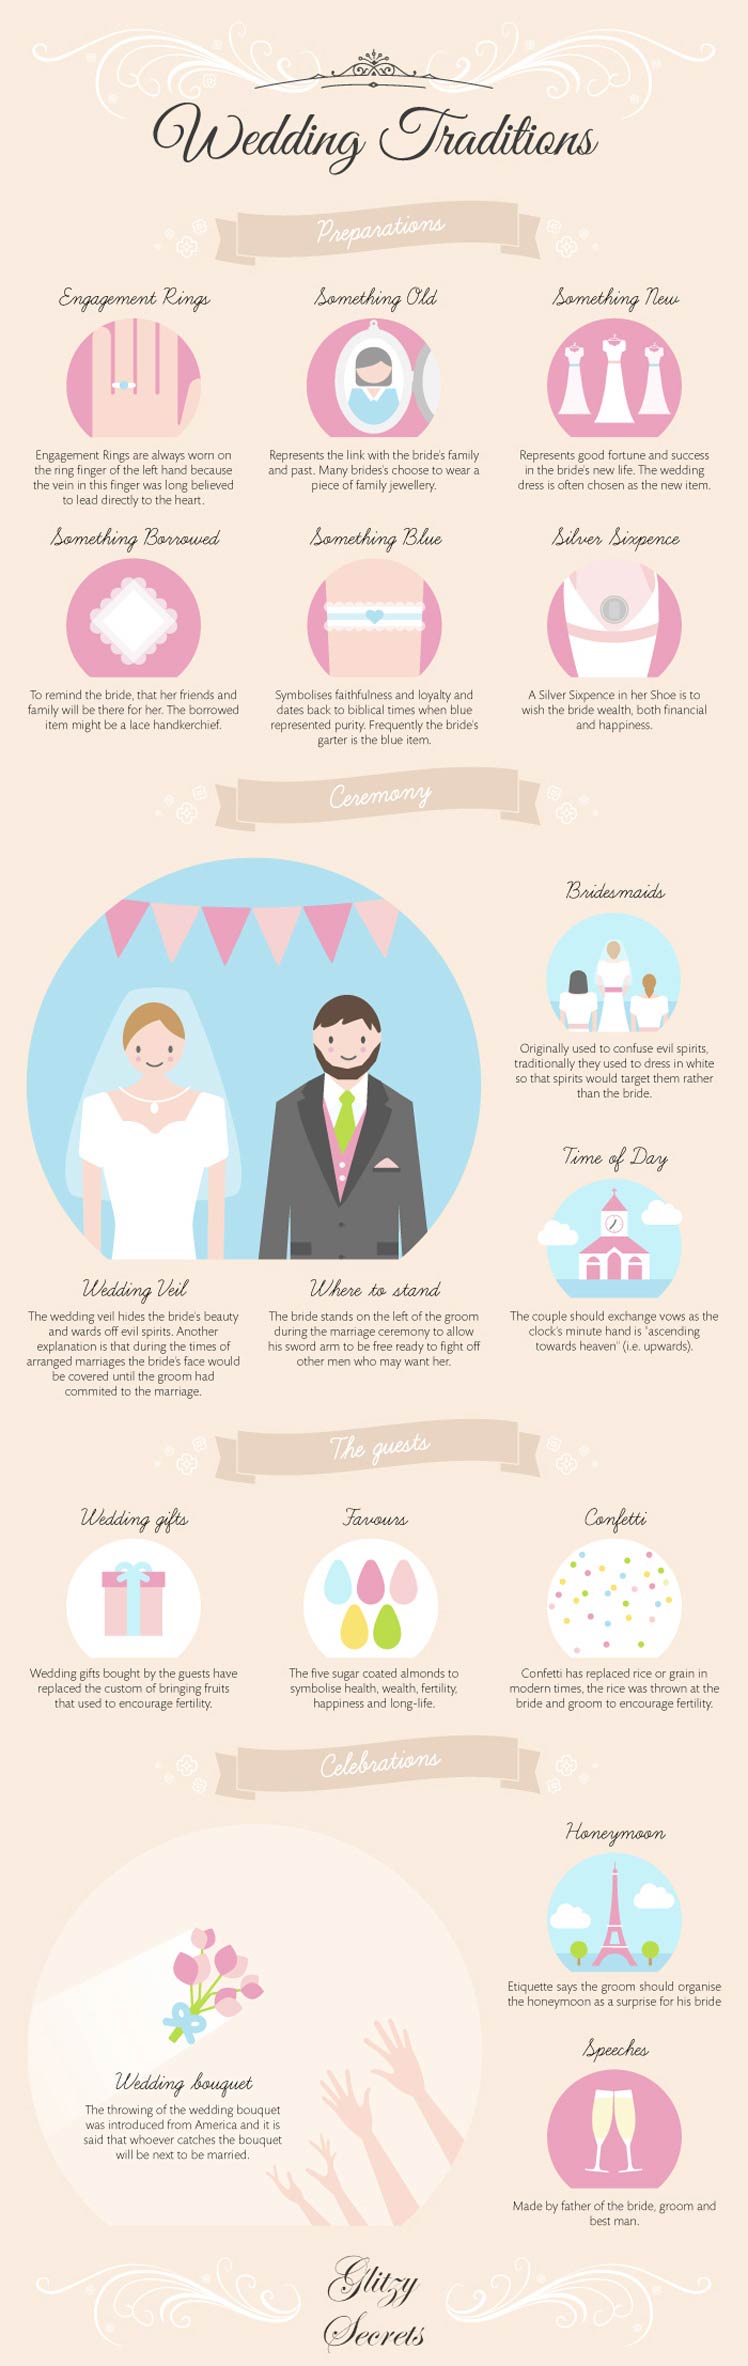 Infographic wedding traditions